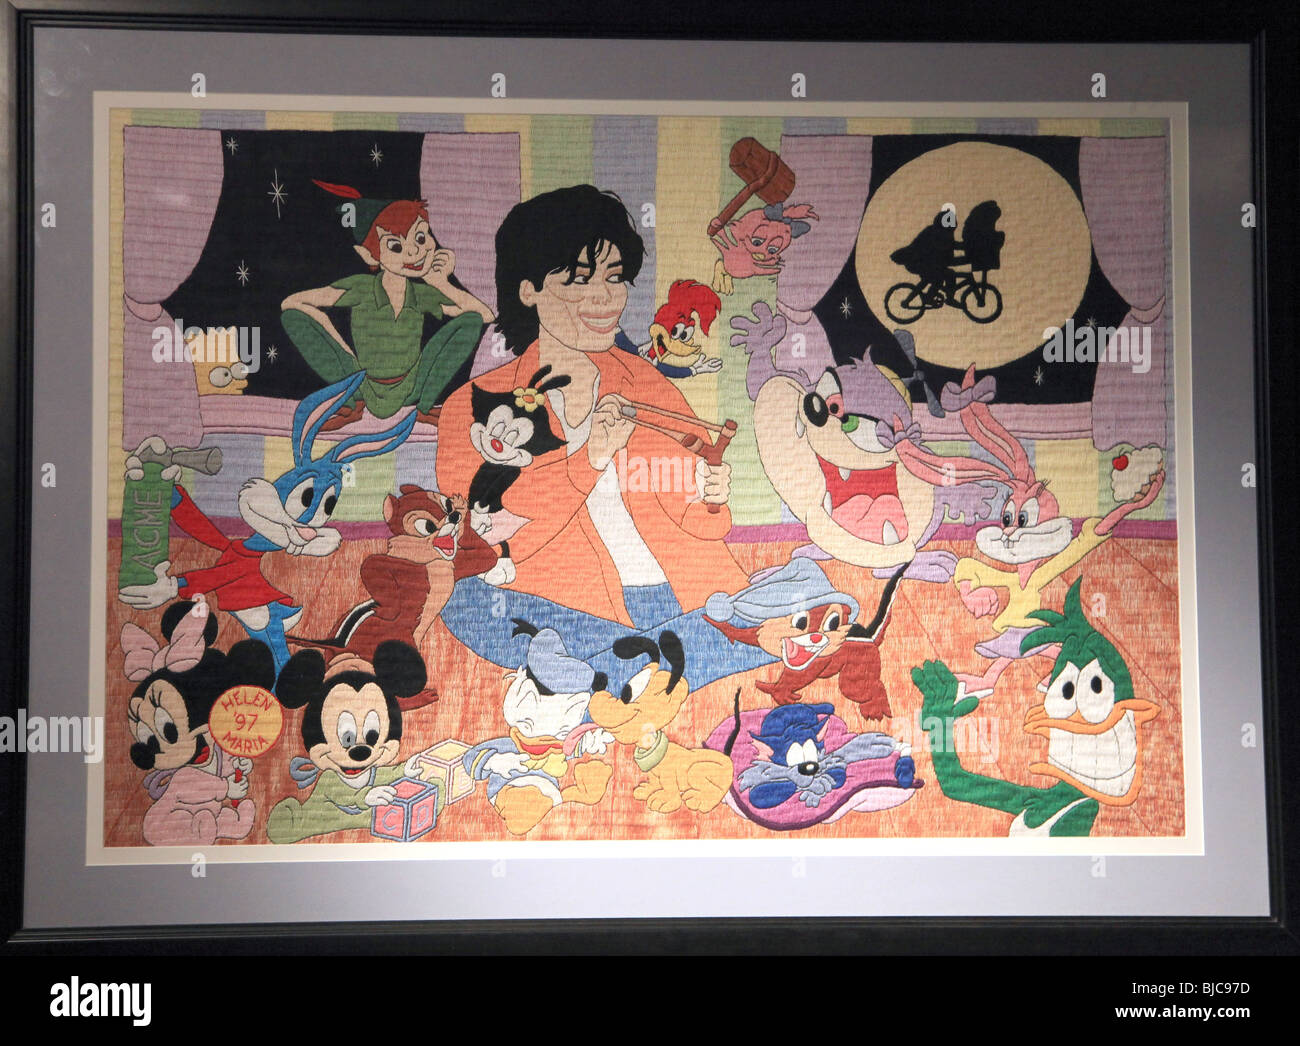 PICTURE OF MICHAEL JACKSON WITH CARTOON CHARACTERS PROPERTY FROM THE LIFE &  CAREER OF MICHAEL JACKSON JULIEN'S AUCTION PREVIEW Stock Photo - Alamy